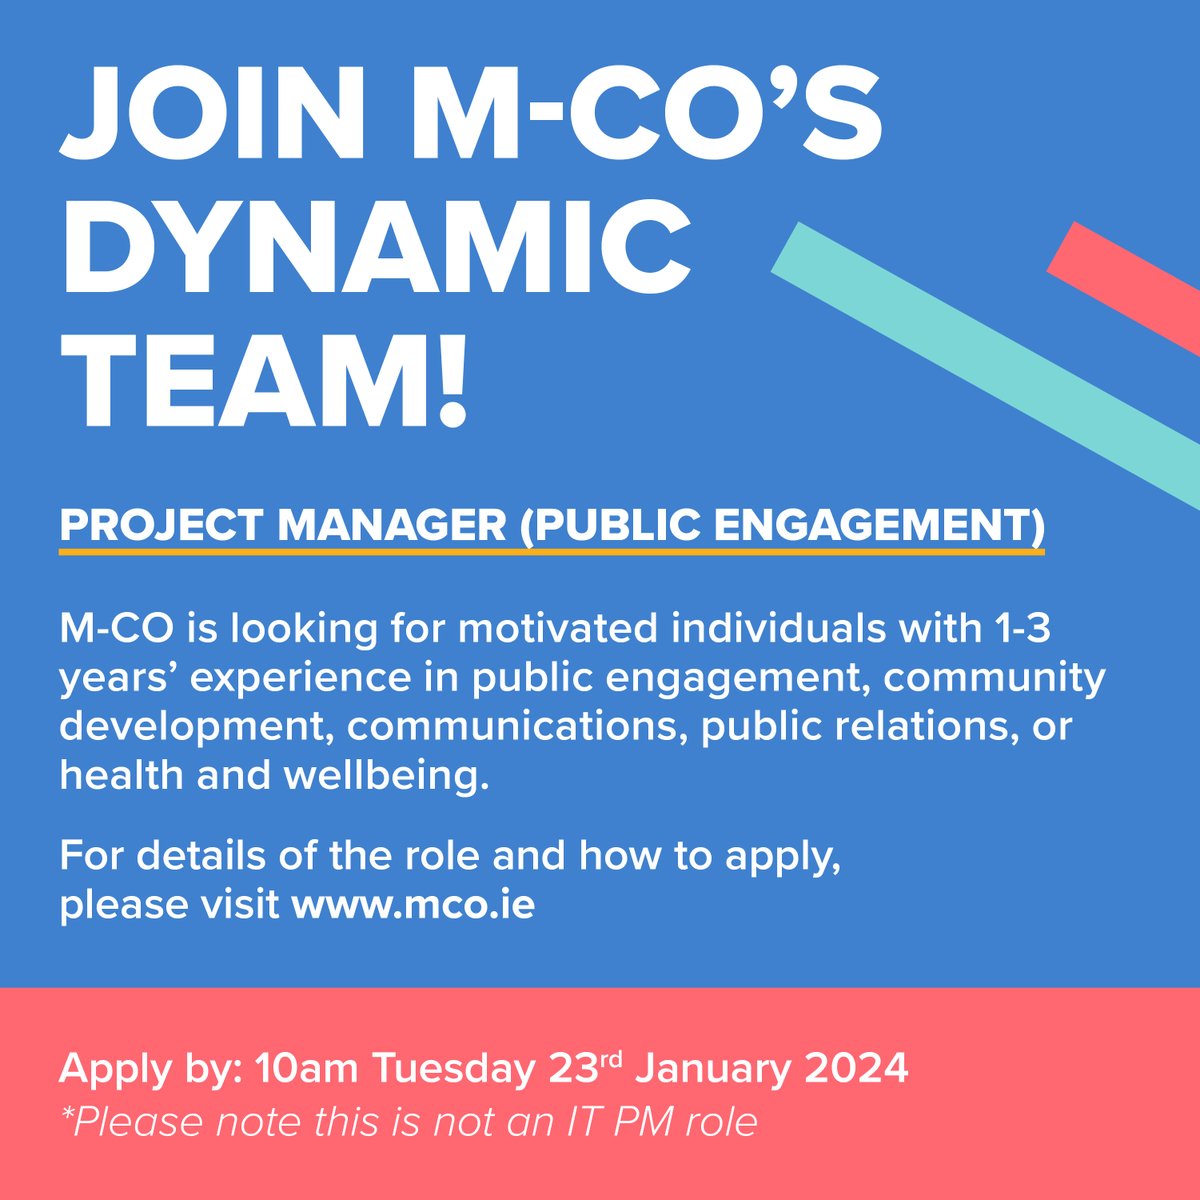 #TeamMCO is #recruiting for a Project Manager (Public Engagement). For more details on the role, click here: MCO recruitment role Closing date: 10am on 24th January, 2024 Come work with us! #hiring #workwithus #projectmanager #publicengagement